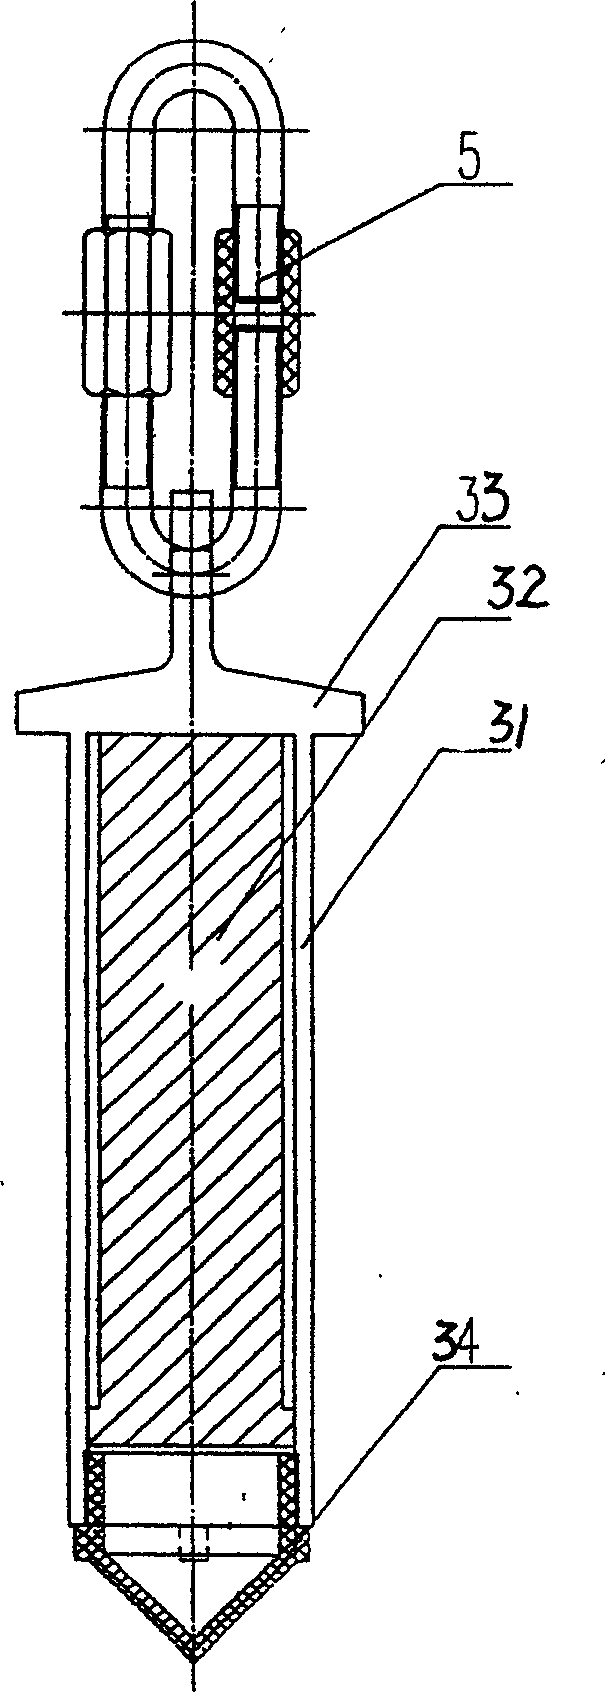 Cathode system for electric demisting device with conductive fiberglass reinforced plastic